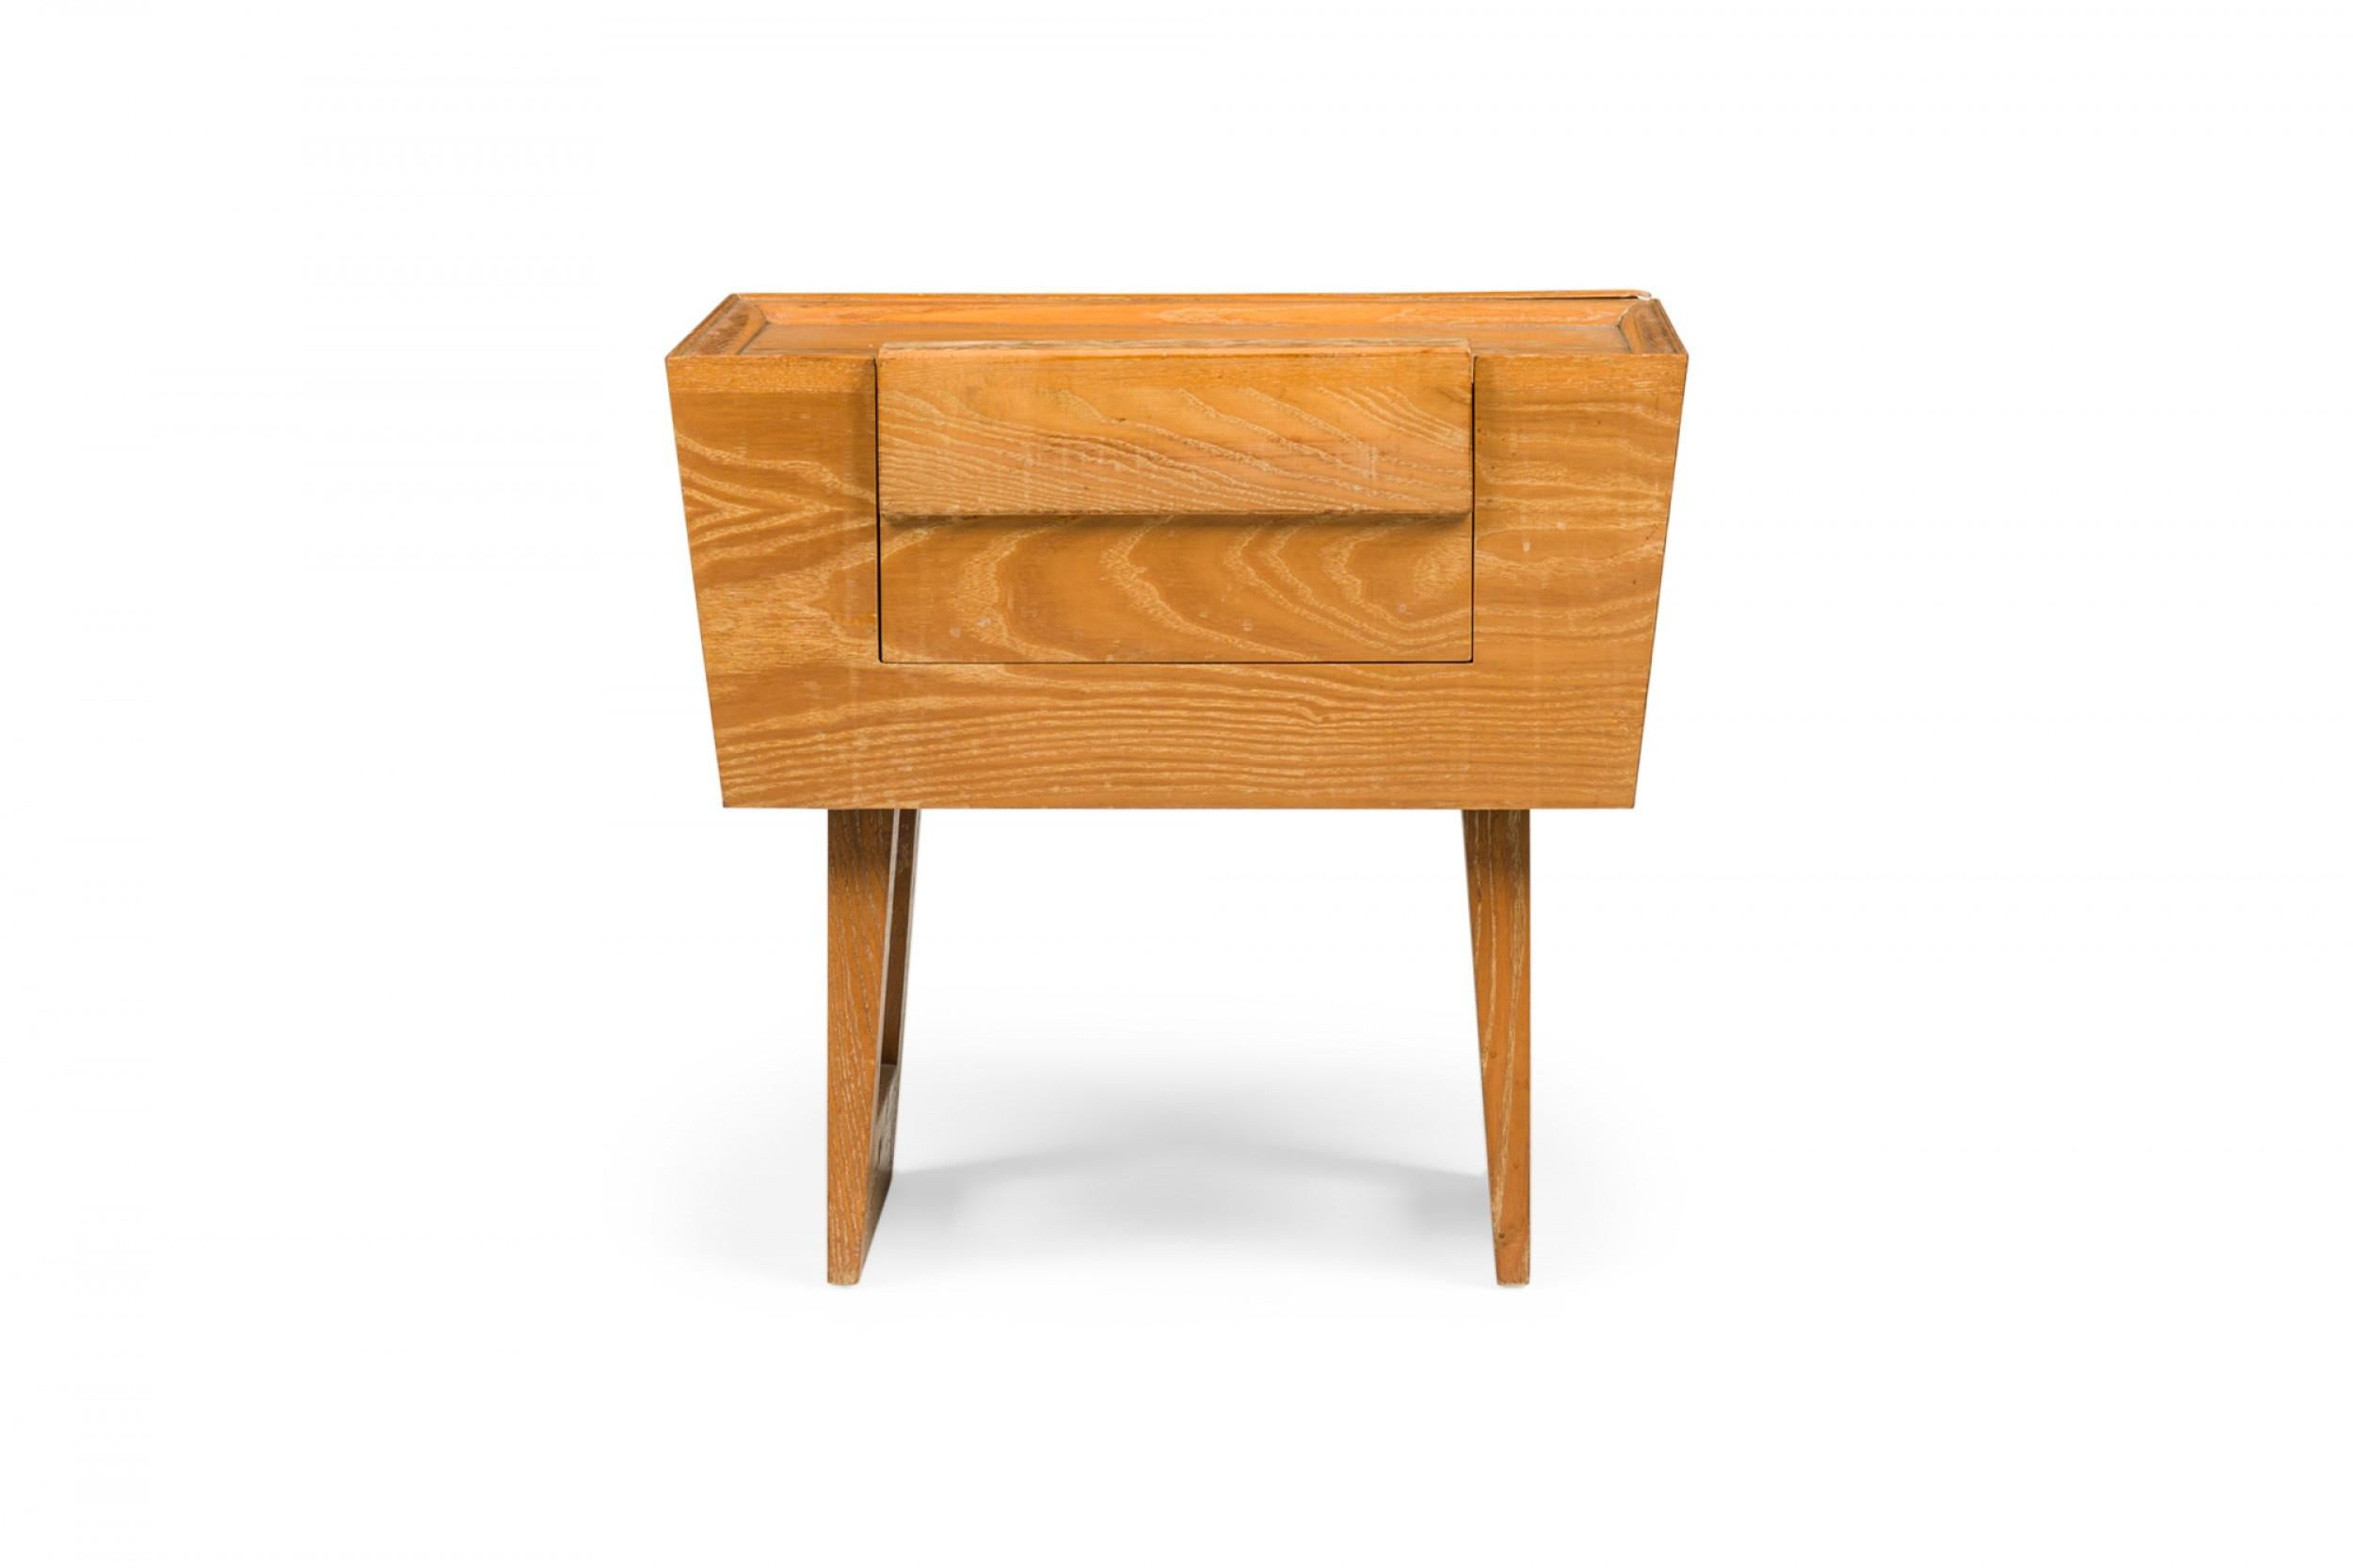 PAIR of American Mid-Century light wooden nightstands with tapered trapezoidal cabinets containing a single drawer, resting on two bracket-shaped legs. (PAUL LASZLO FOR BROWN SALTMAN)(PRICED AS PAIR)(Similar pieces: DUF0738, DUF0739).